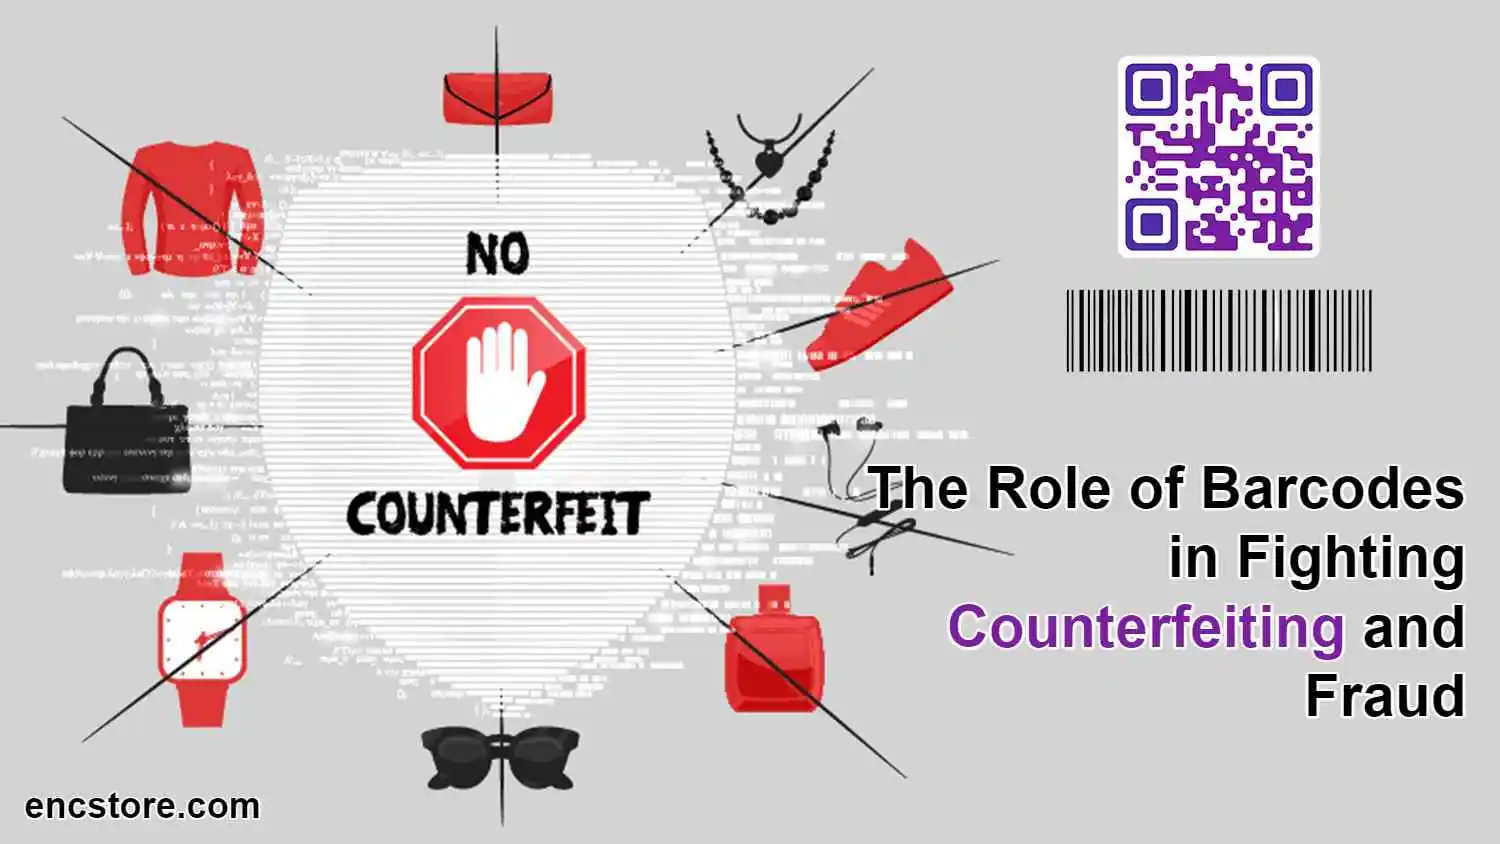 The Role of Barcodes in Fighting Counterfeiting and Fraud